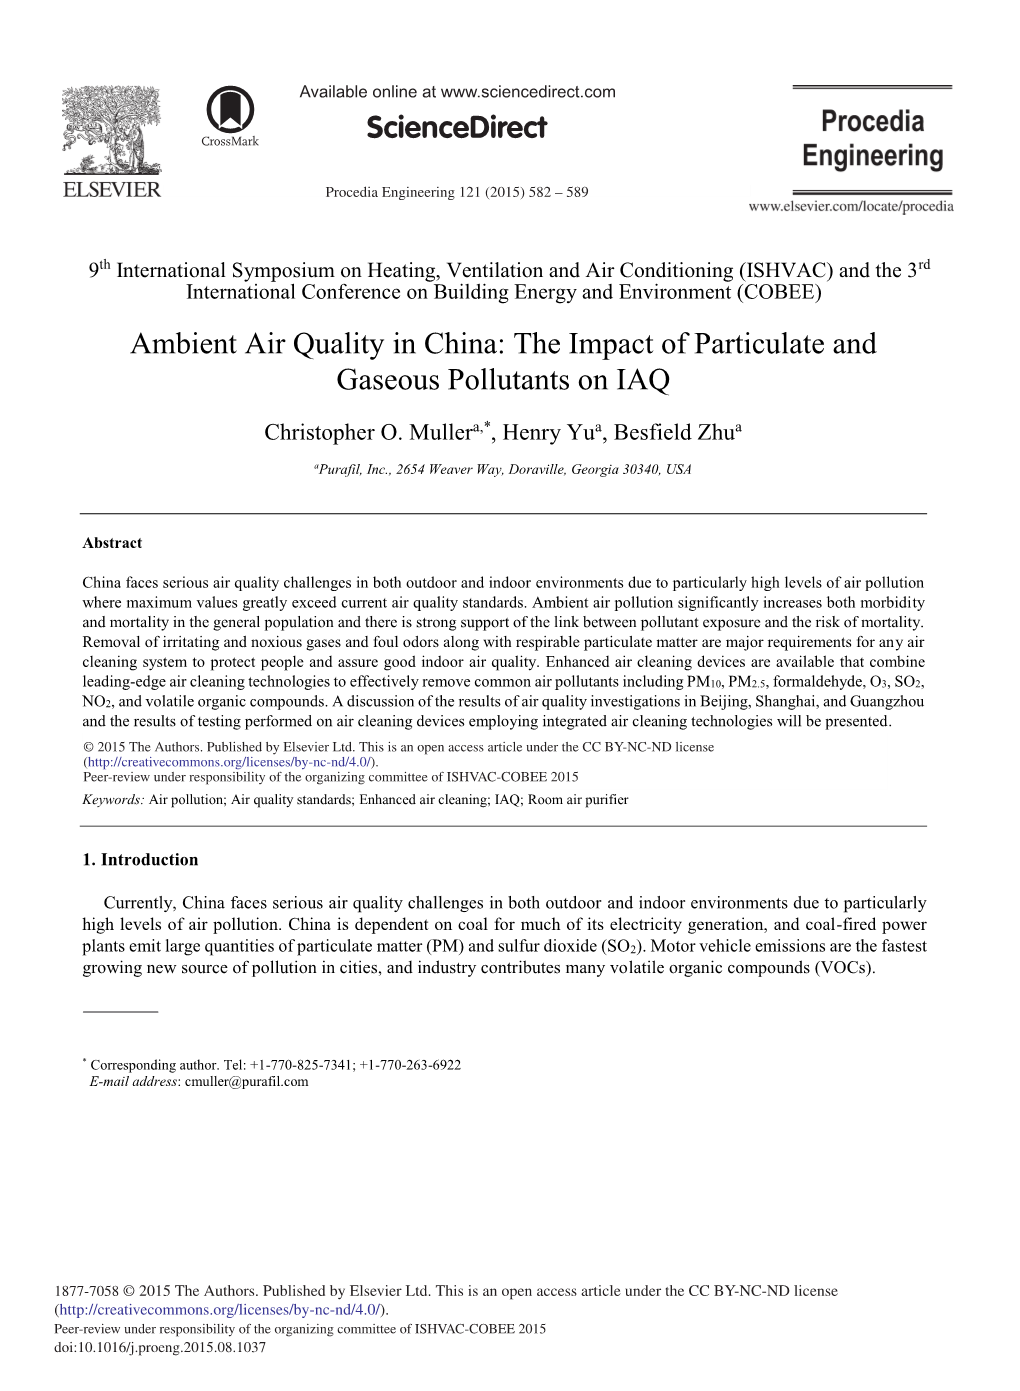 The Impact of Particulate and Gaseous Pollutants on IAQ